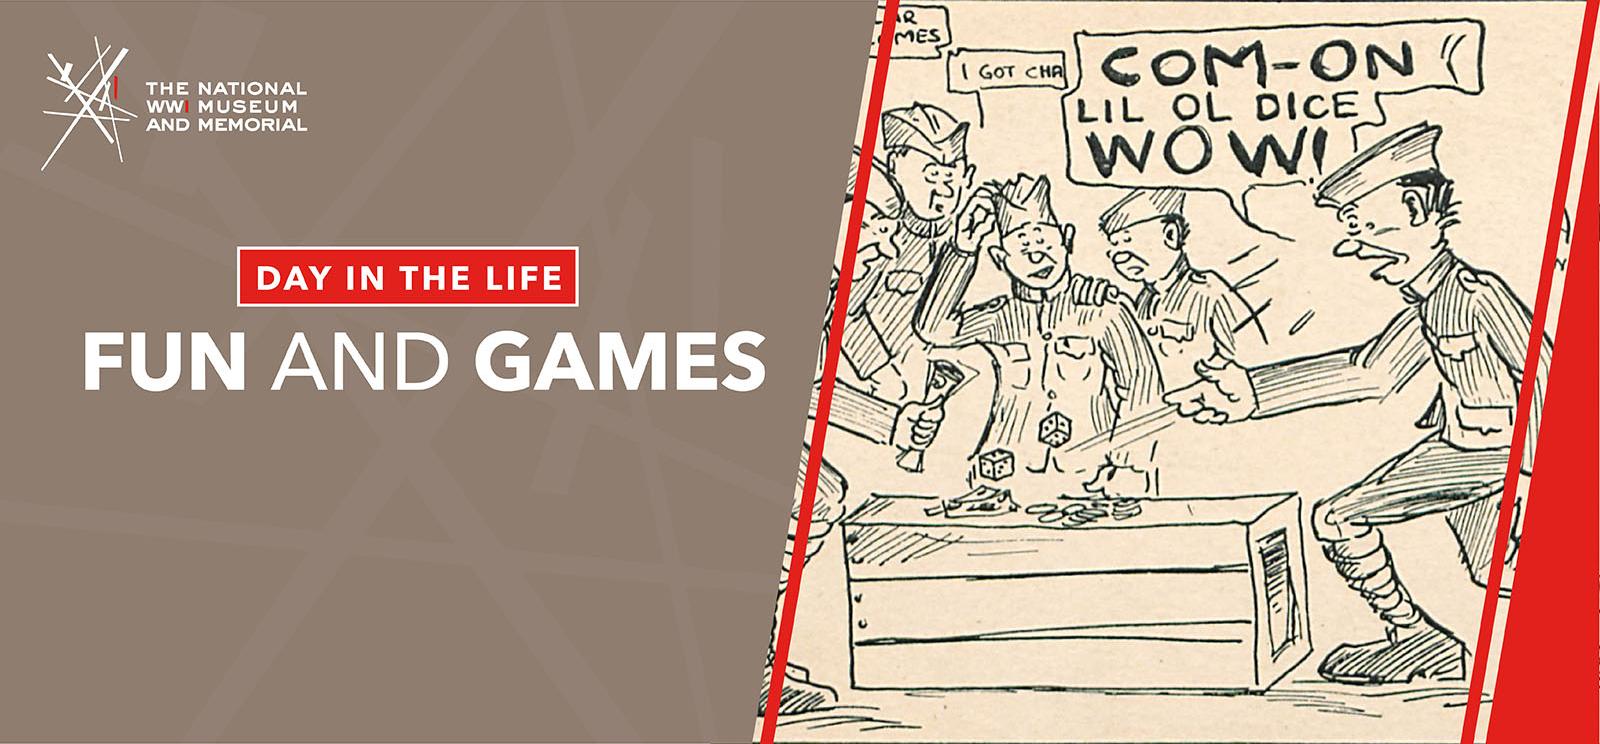 Image: printed cartoon of WWI soldiers gathered around a wooden crate throwing dice. One soldier is saying, 'COM-ON LIL OL DICE WOW!' Banner text: 'Day in the Life / Fun and Games'